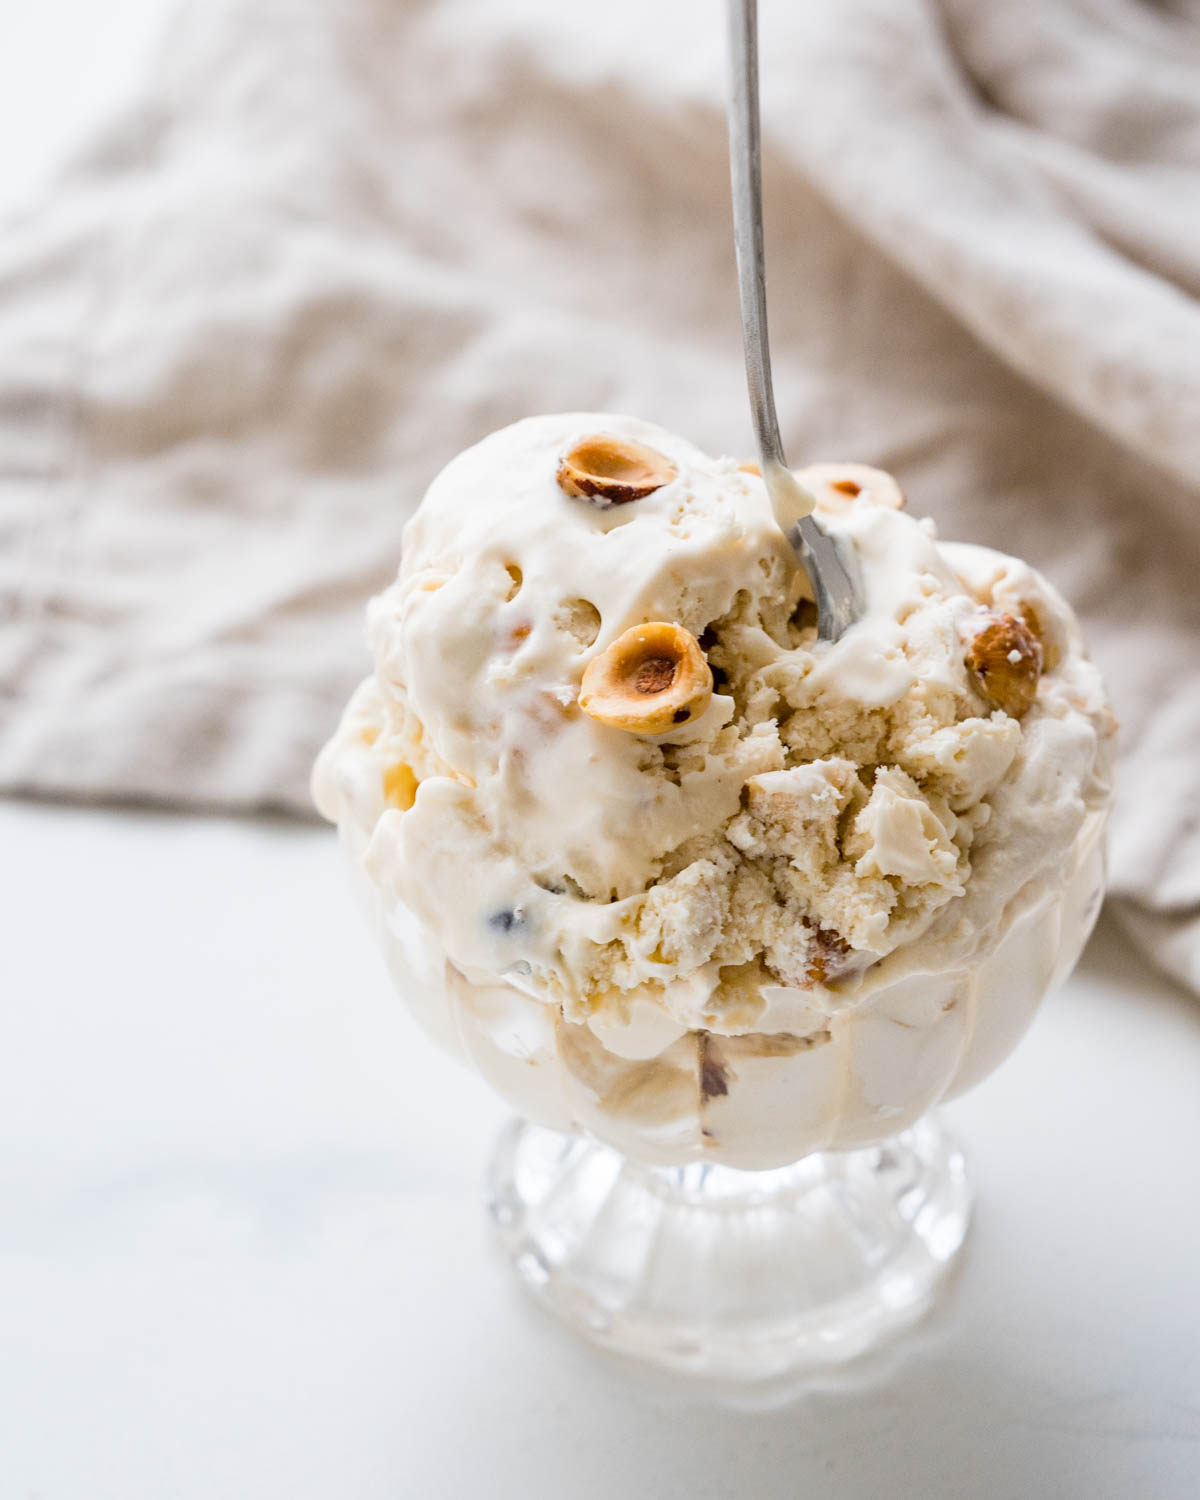 A dish of hazelnut nougat ice cream with extra nuts on top.